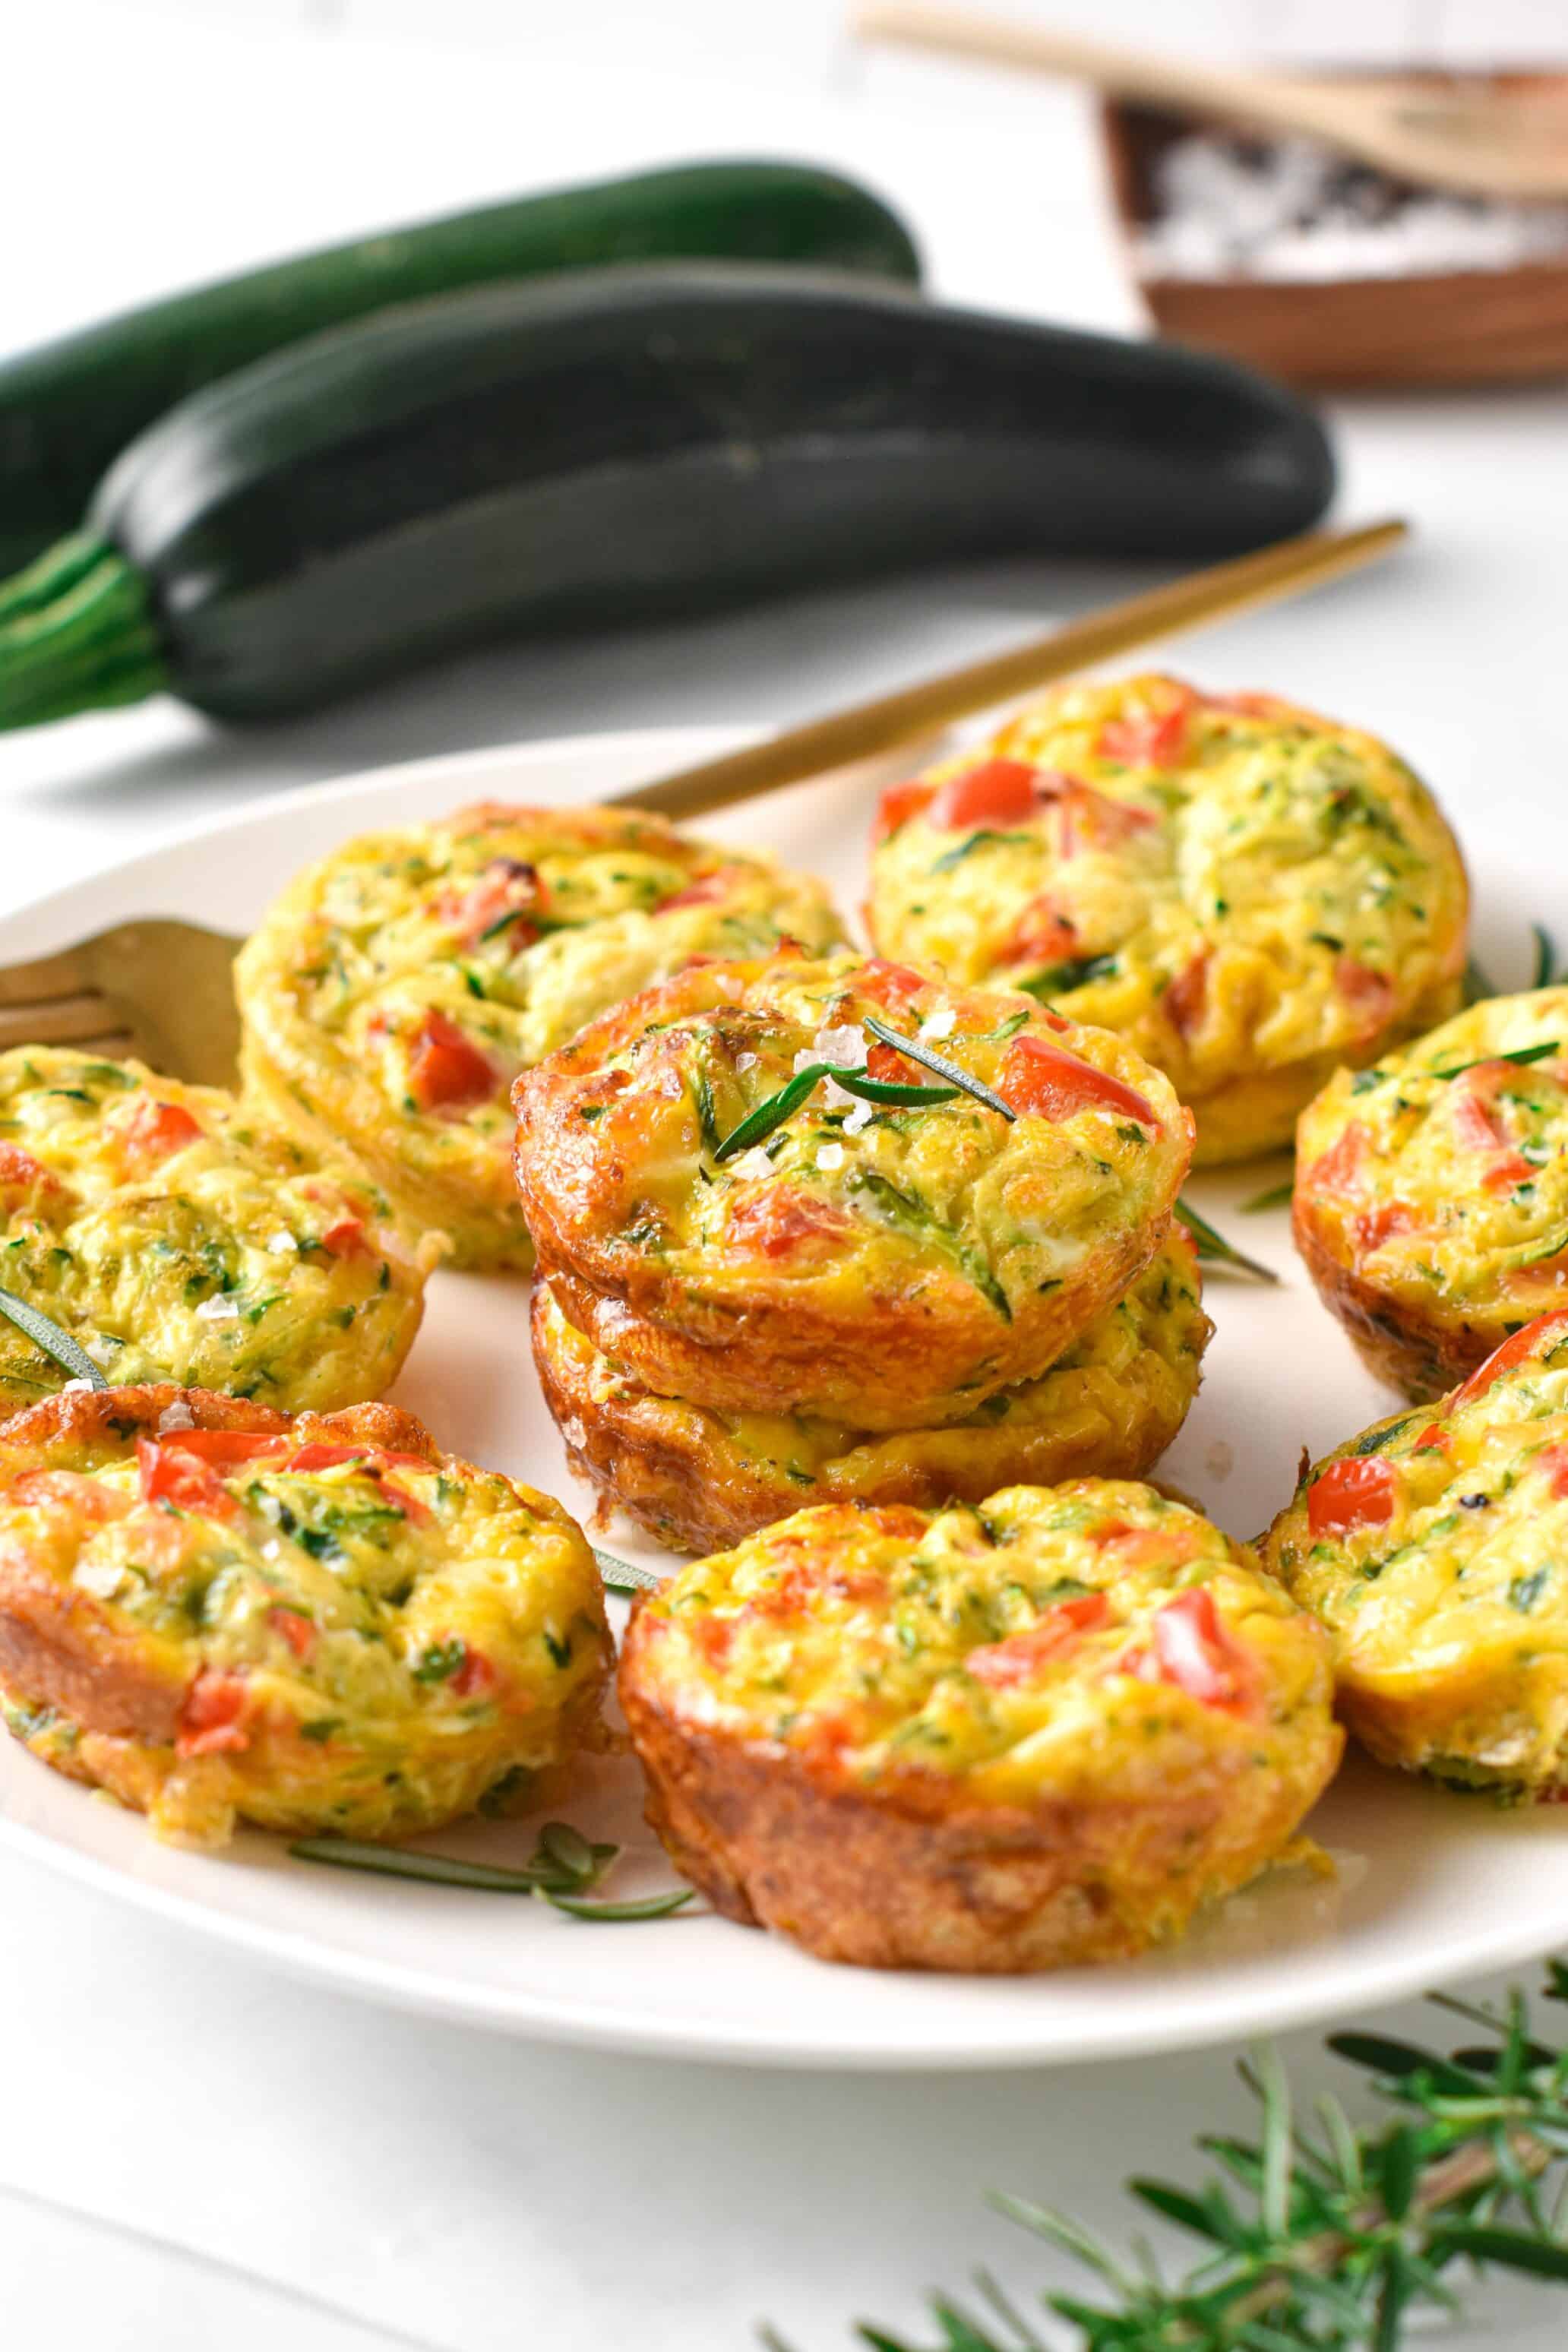 These Zucchini Egg Muffins are delicious high-protein summer breakfast muffins packed with vegetables. They are the best way to meal days of protein breakfast while using a bunch of summer zucchini.